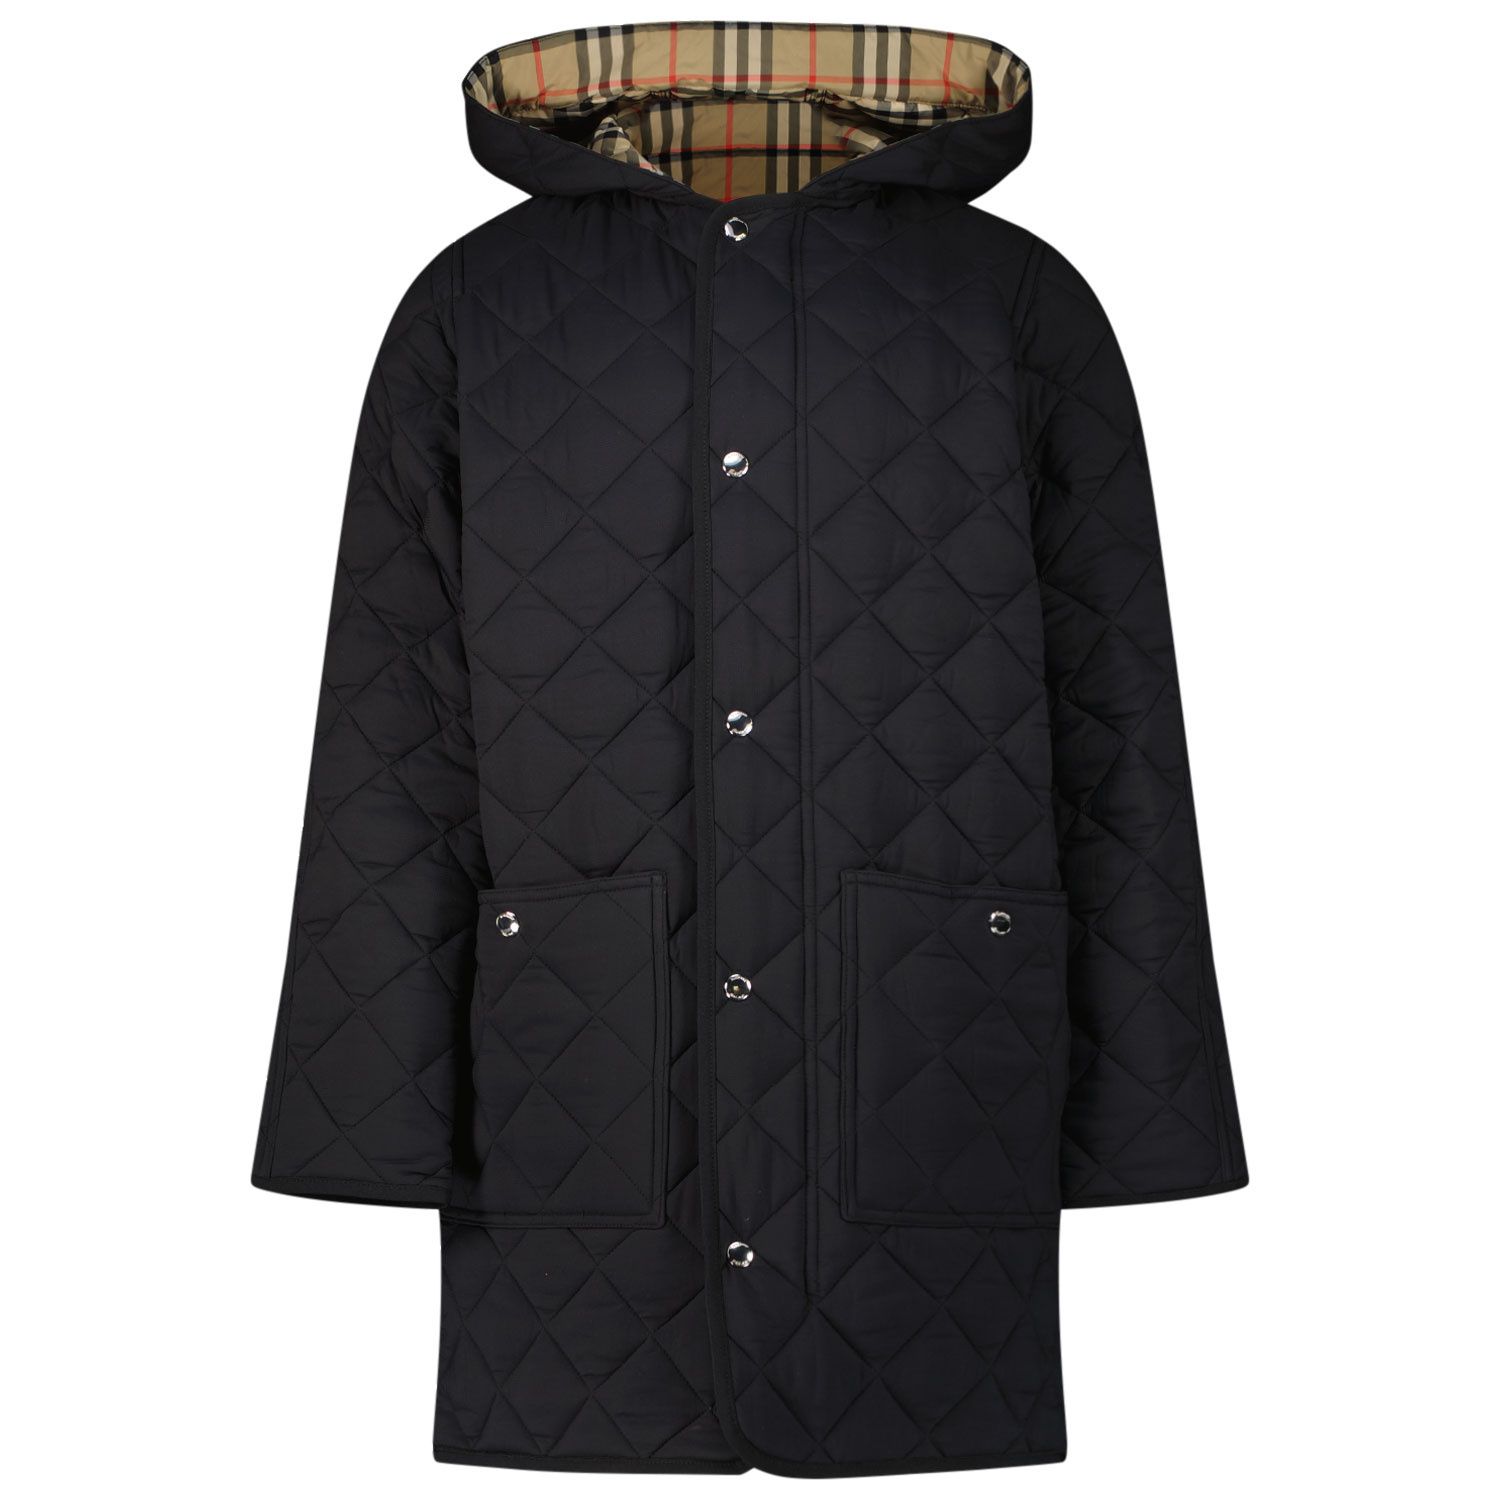 Picture of Burberry 8053682 kids jacket black